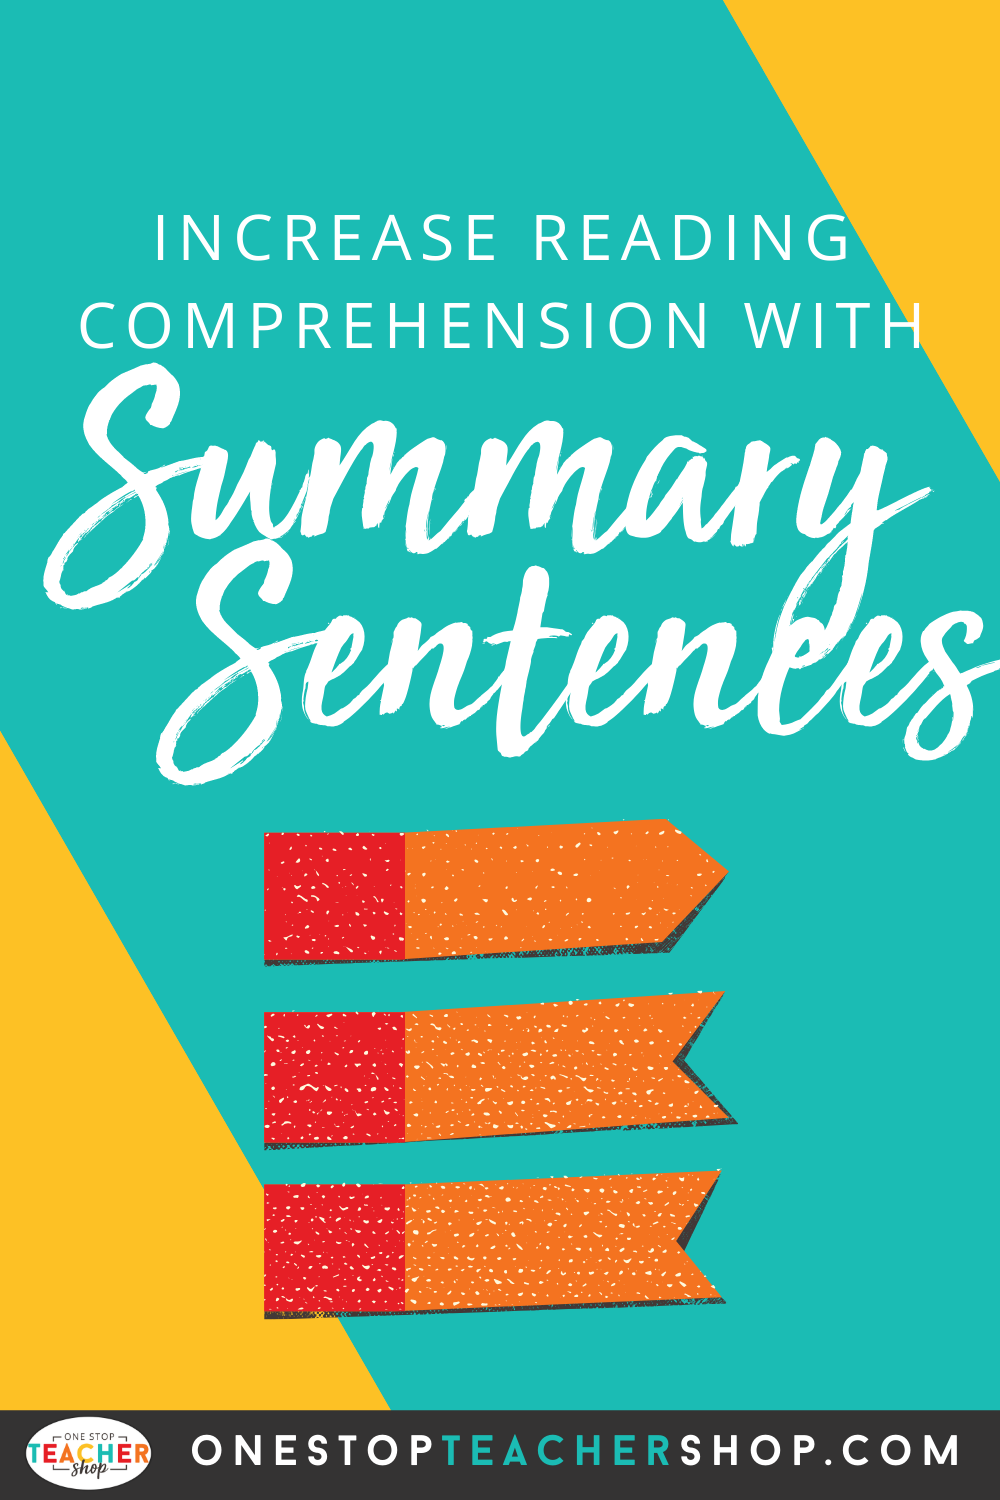 improve-reading-comprehension-with-summary-sentences-one-stop-teacher-shop